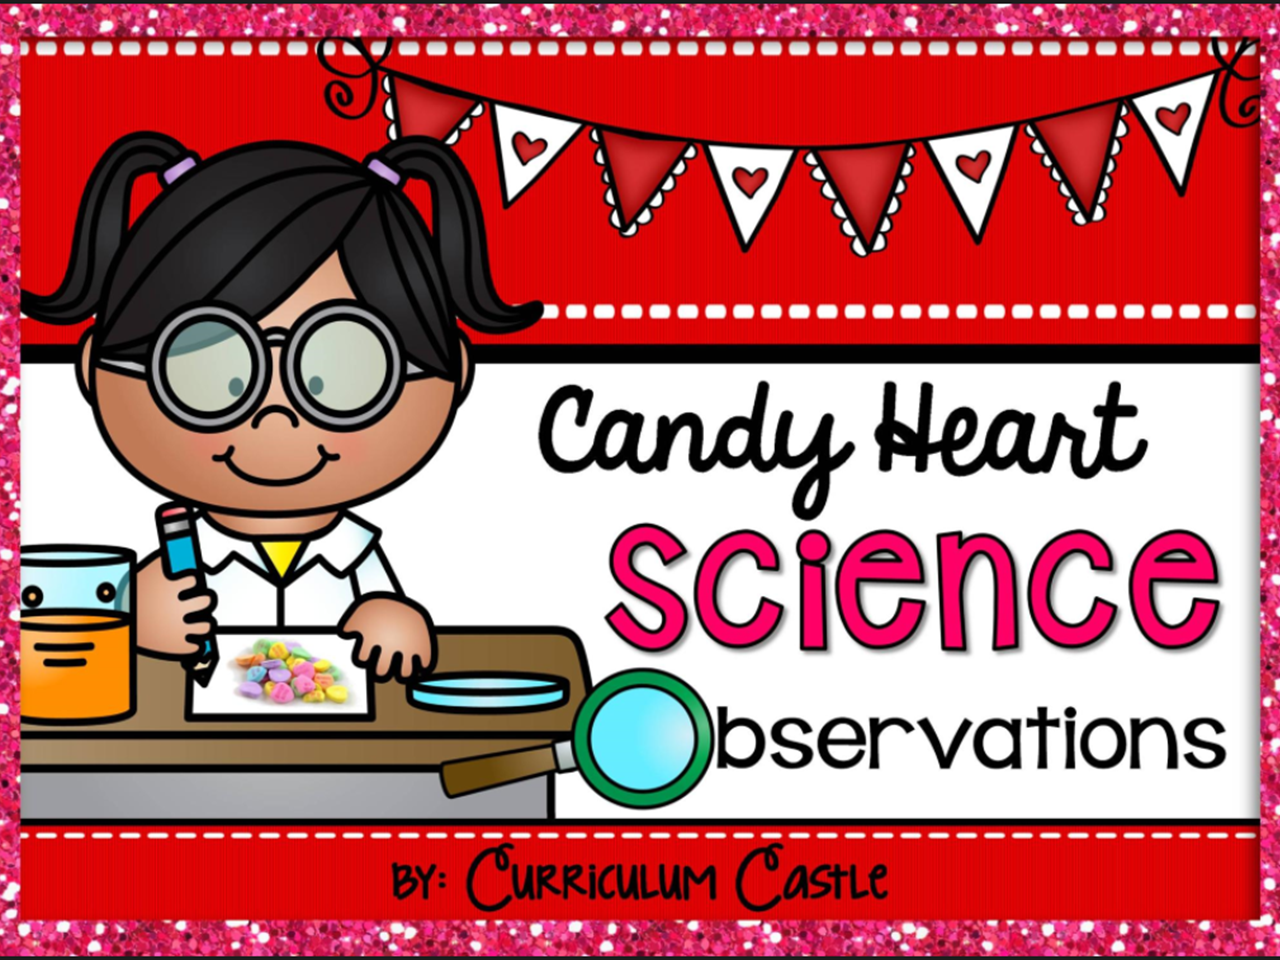 https://www.teacherspayteachers.com/FreeDownload/Valentines-Day-Science-Candy-Hearts-Experiment-FREE-1634839